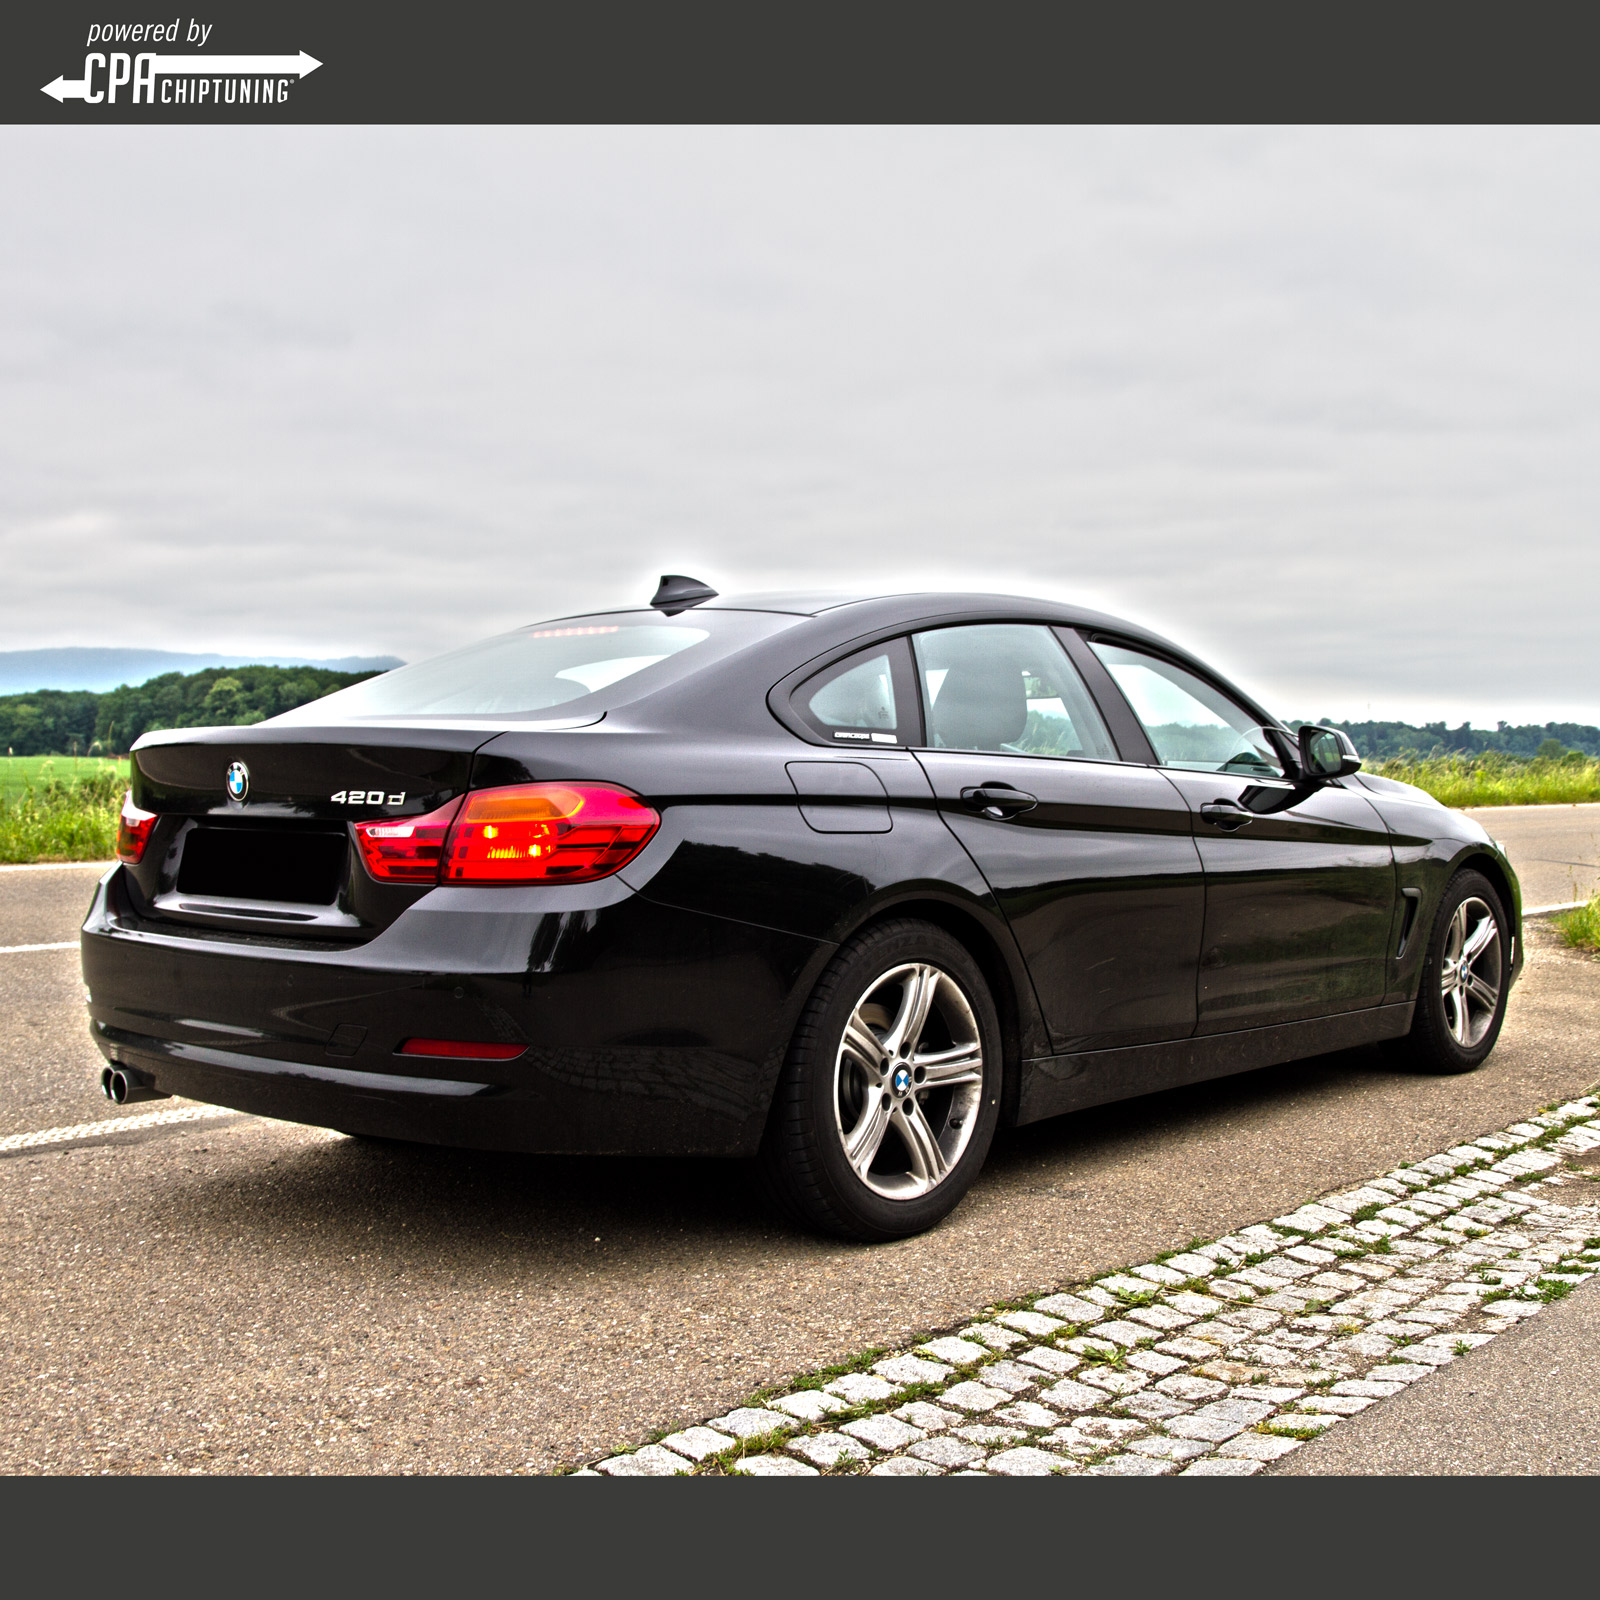 In test – the BMW 420d